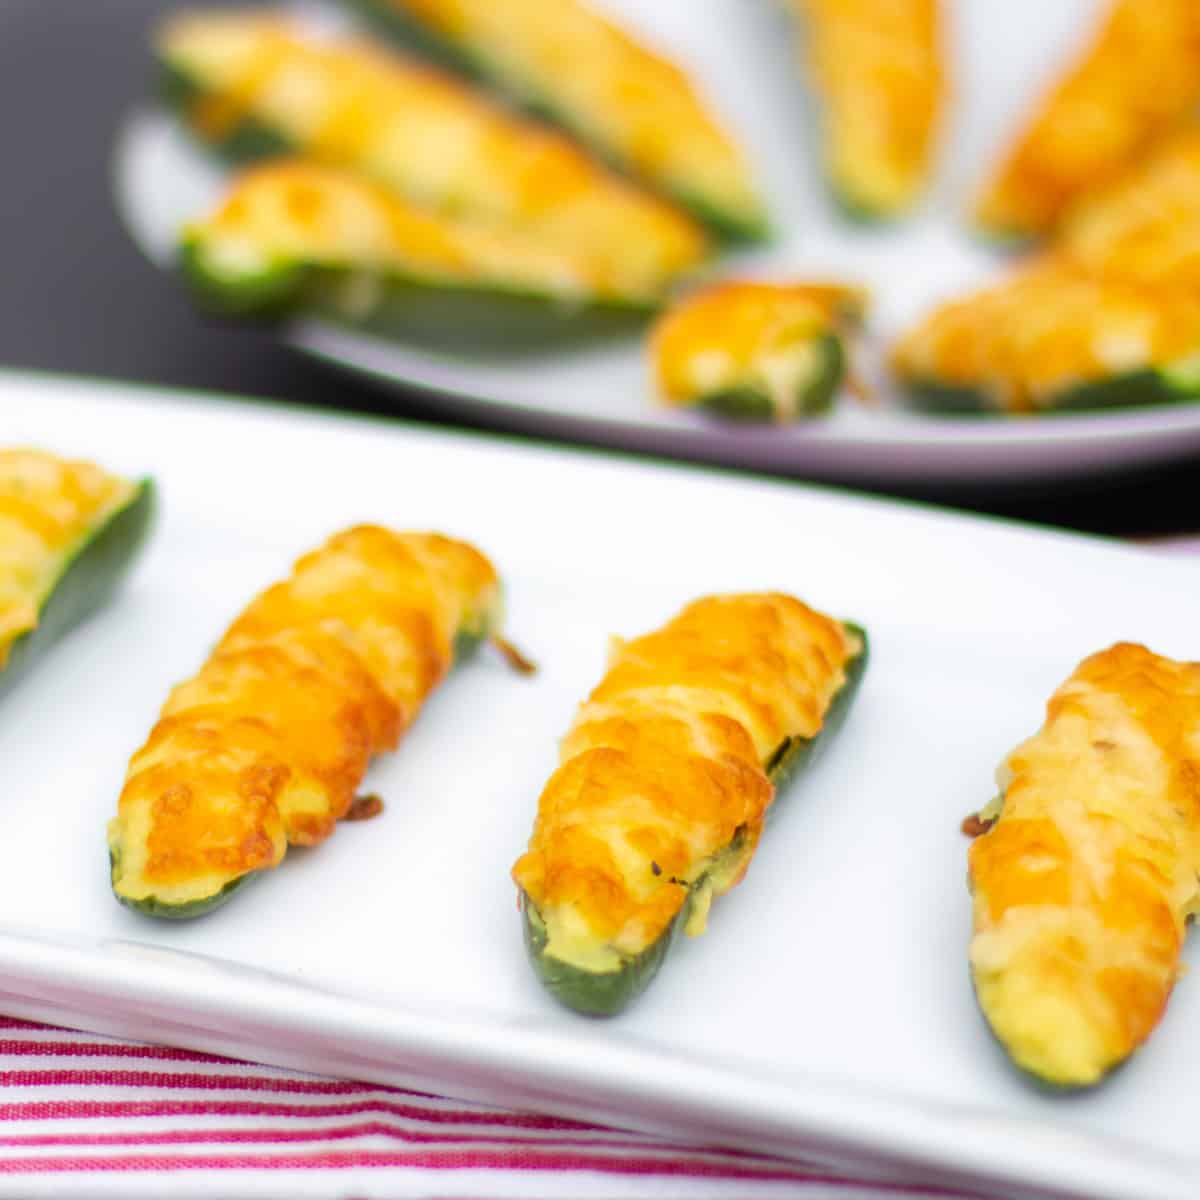 Jalapeno appetizers on a plate.